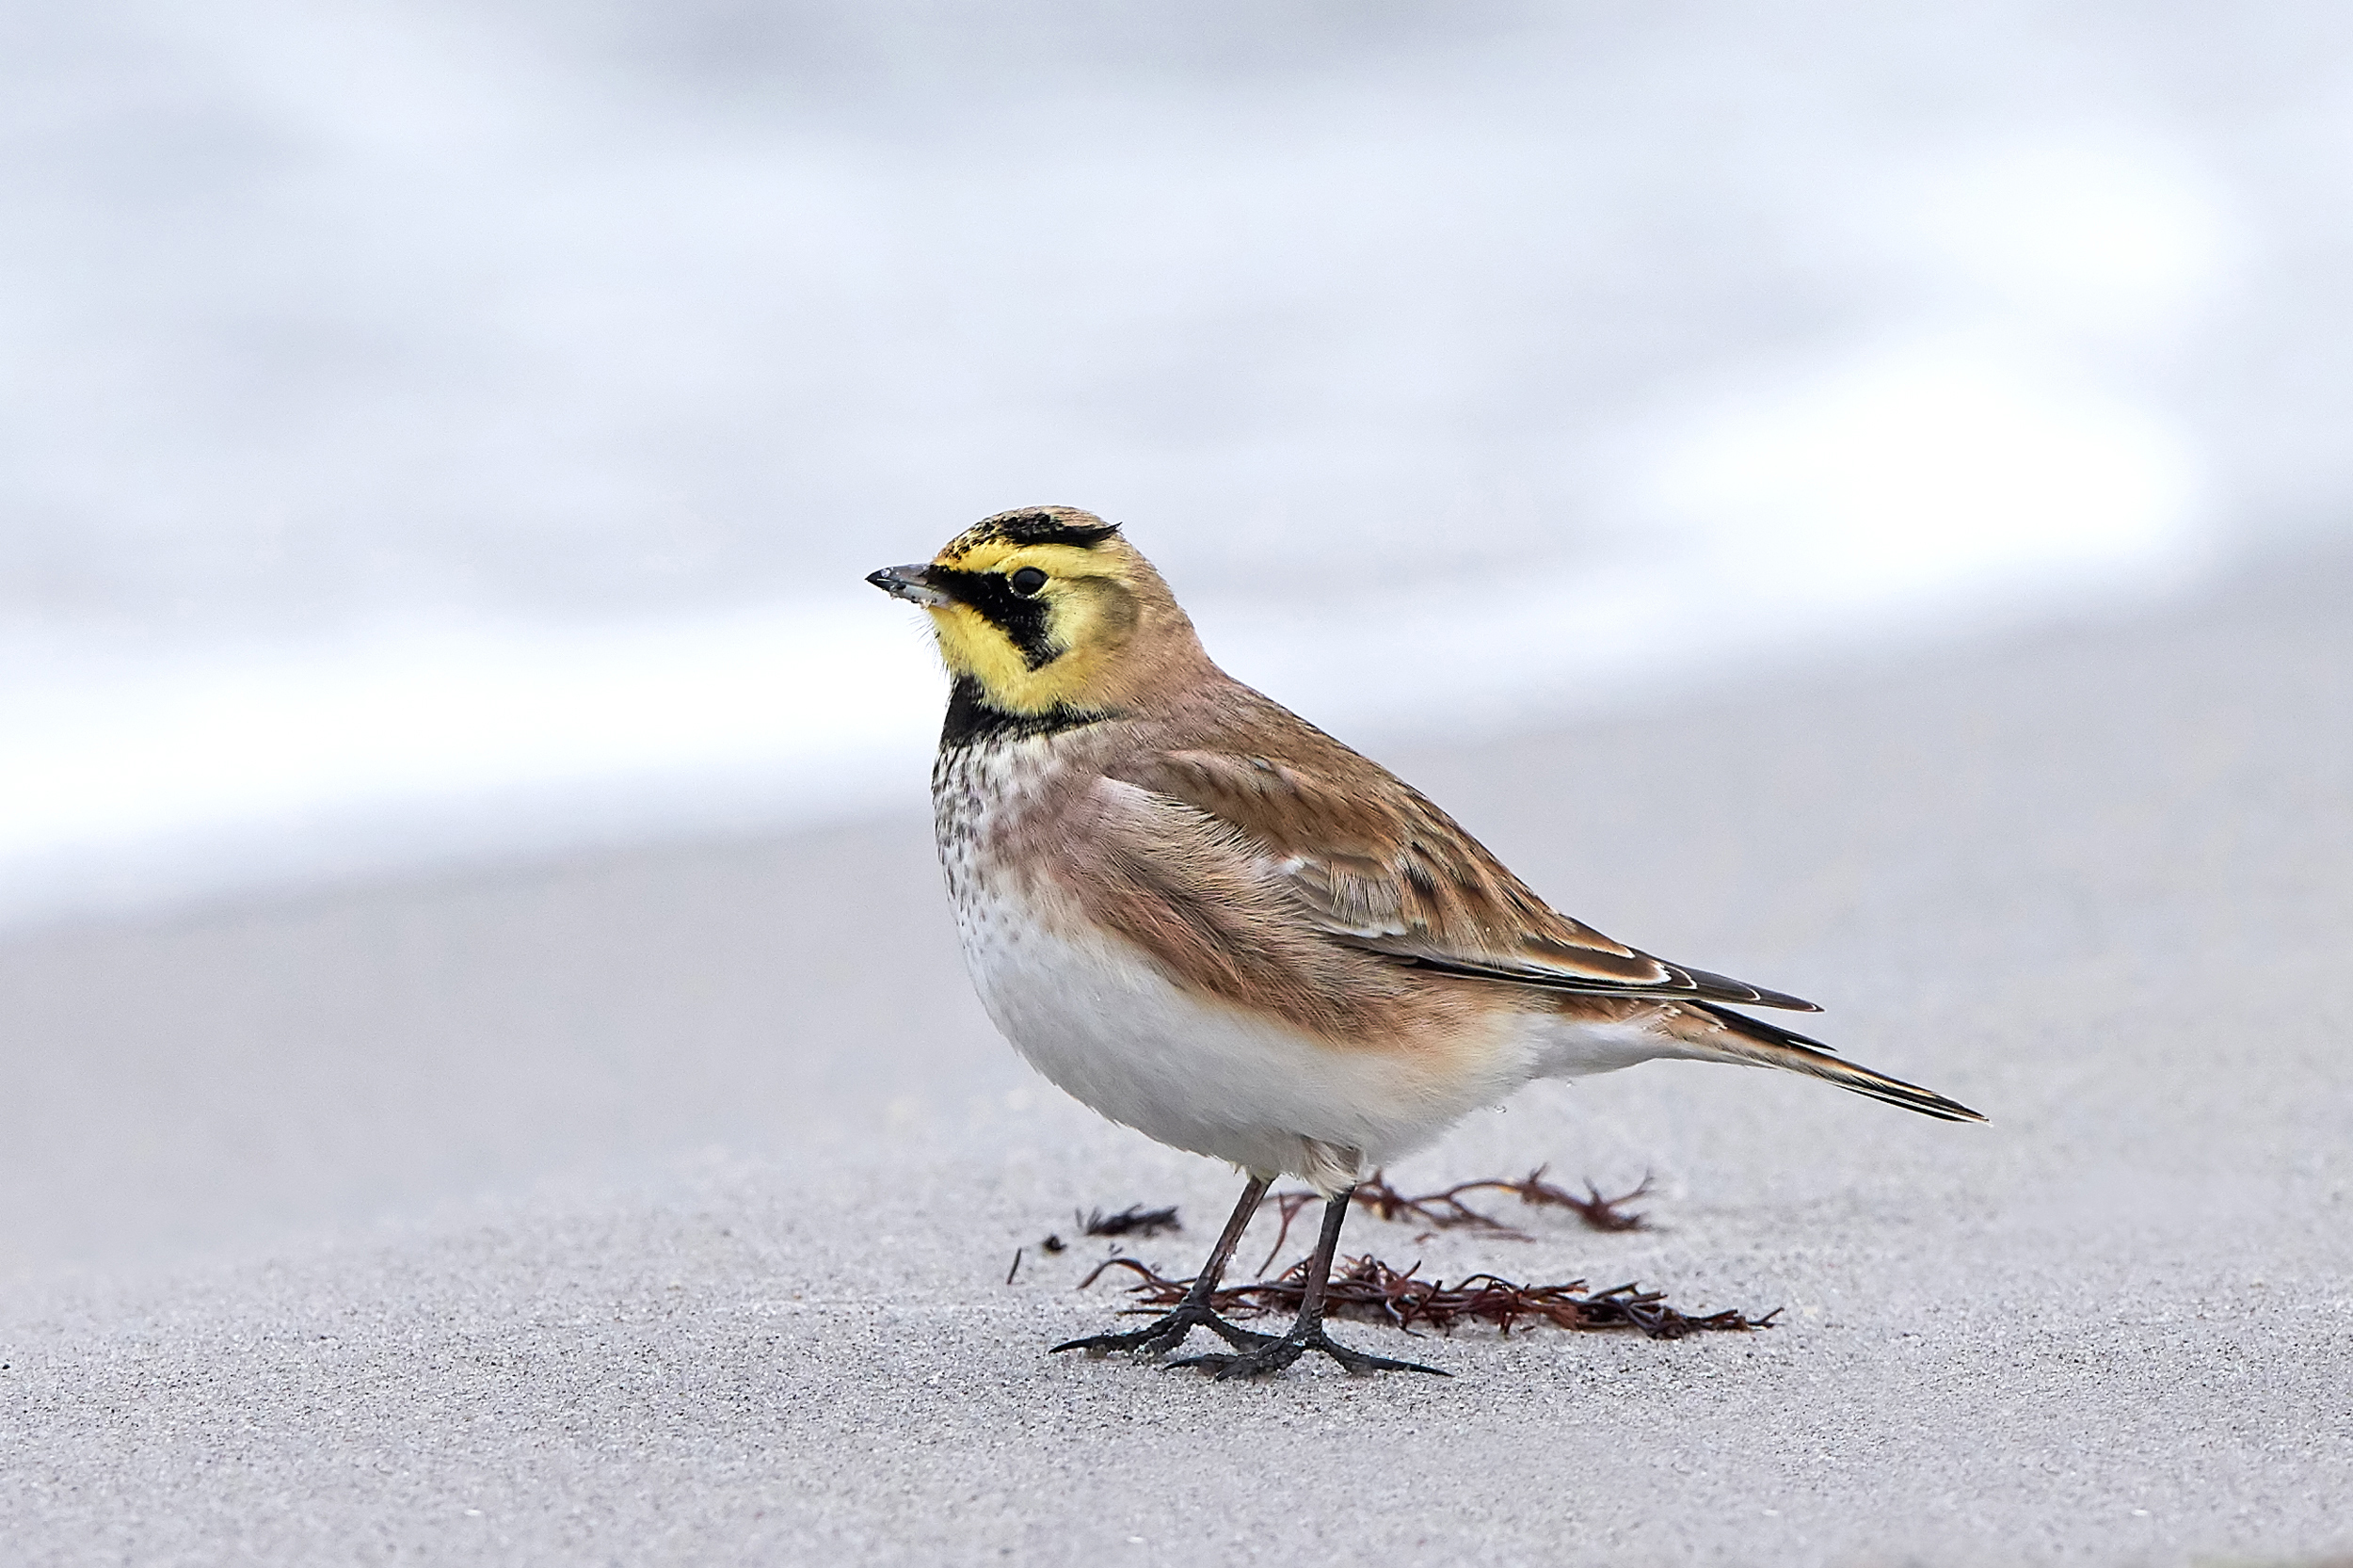 A lone Shore Lark stood on a sandy beach looking out to sea.